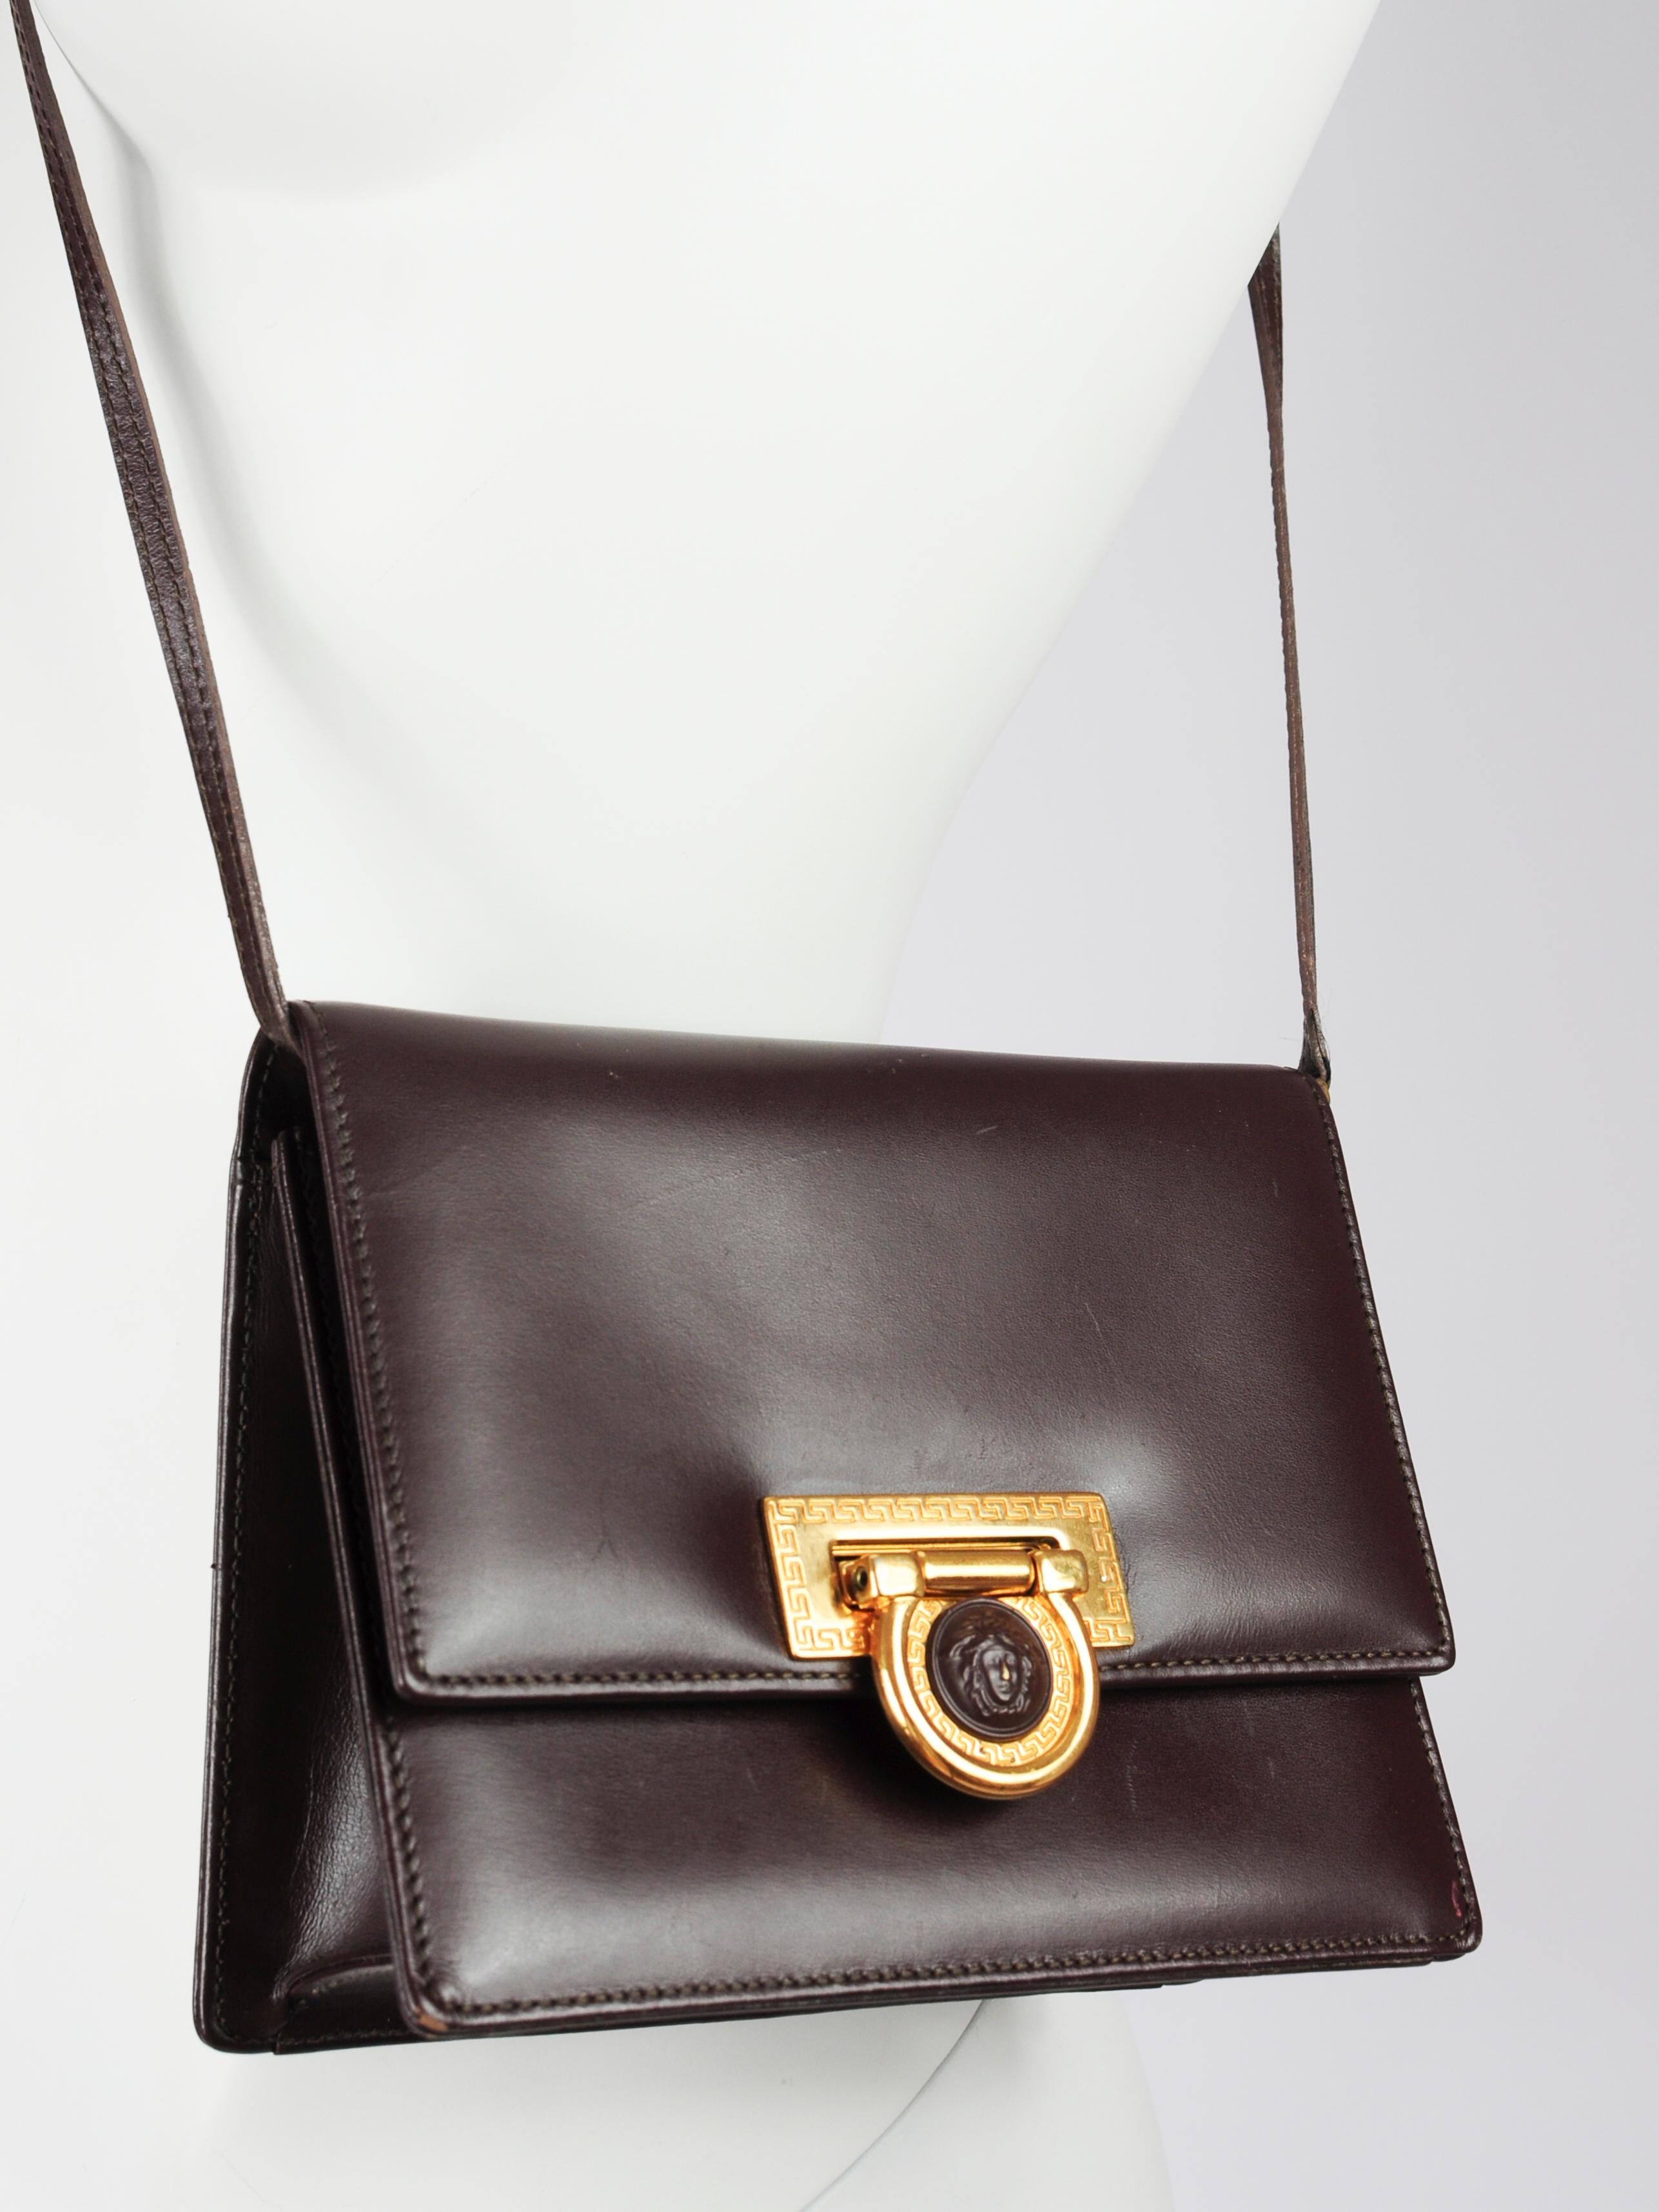 Gianni Versace brown leather crossbody bag with Versace signature medusa head closure. Along the edges of the golden hardware there are other Greek influences visible, which are something that comes back in a lot of Gianni Versace’s designs. The